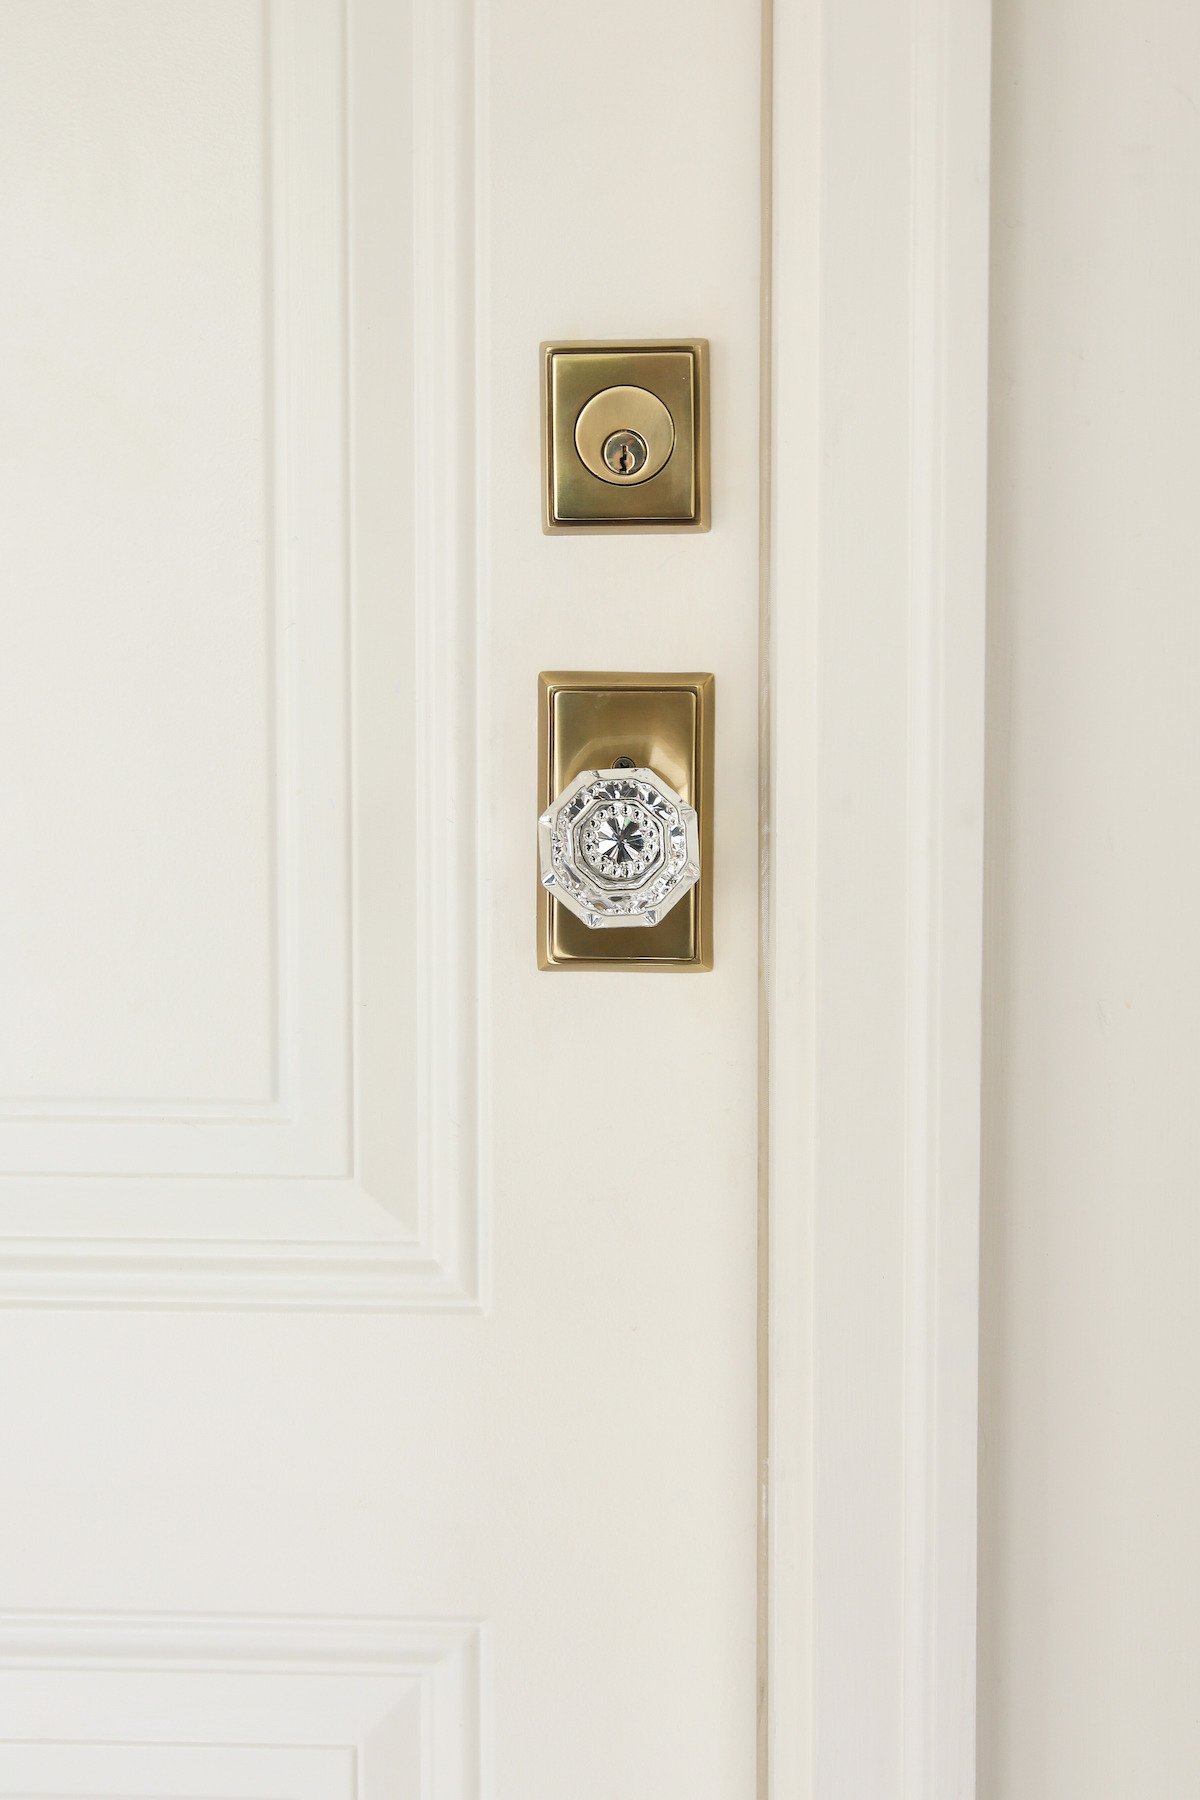 A white door featuring a brass lock and brass door knobs on square brass plates.